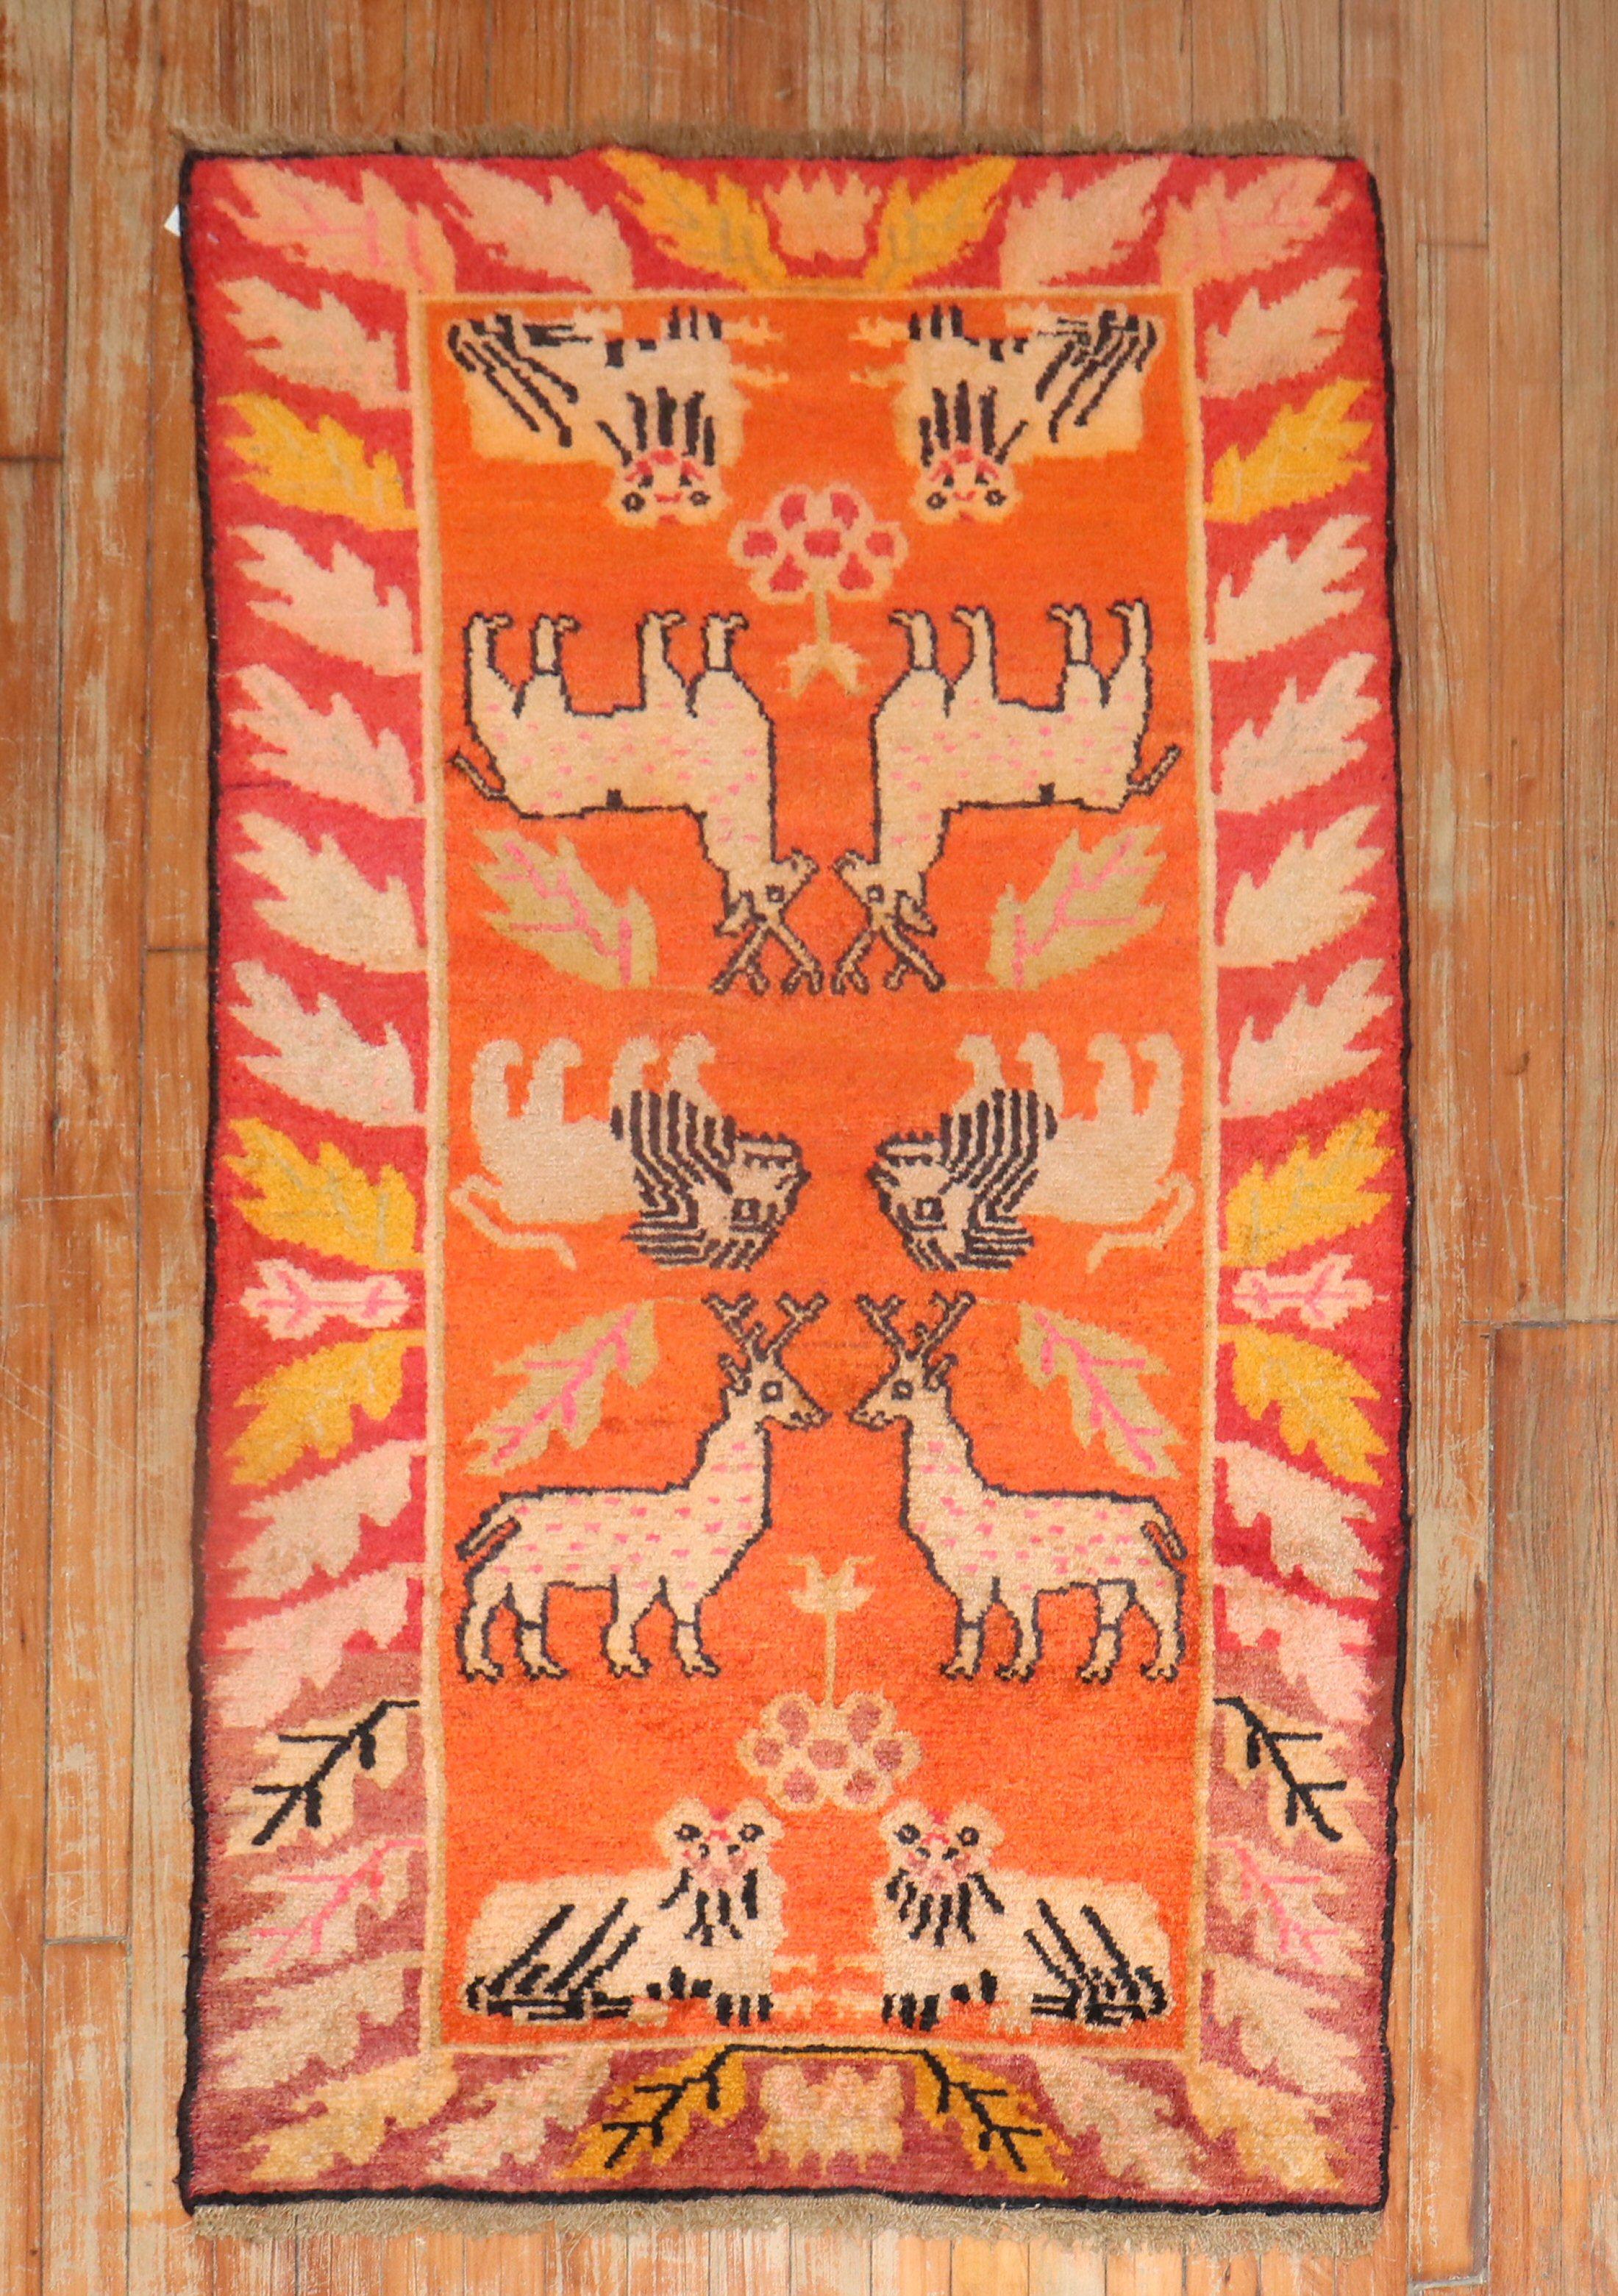 A 2nd quarter of the 20th Century Tibetan Rug featuring an animal pictorial motif on an orange ground color

Measures: 2'10